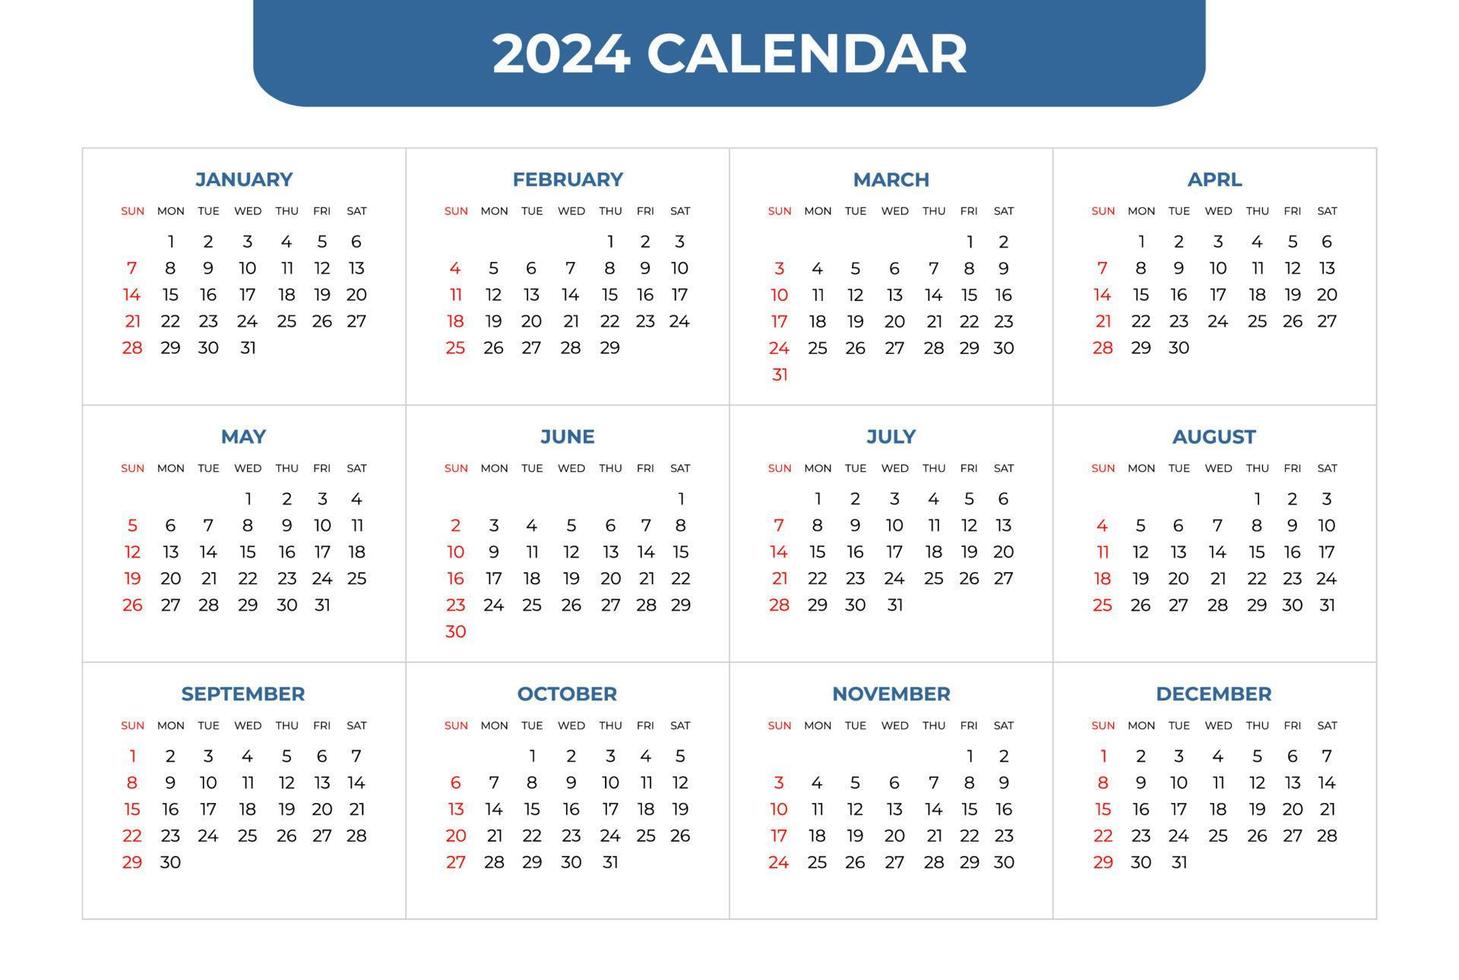 2024 calendar template, simple and easy to use vector